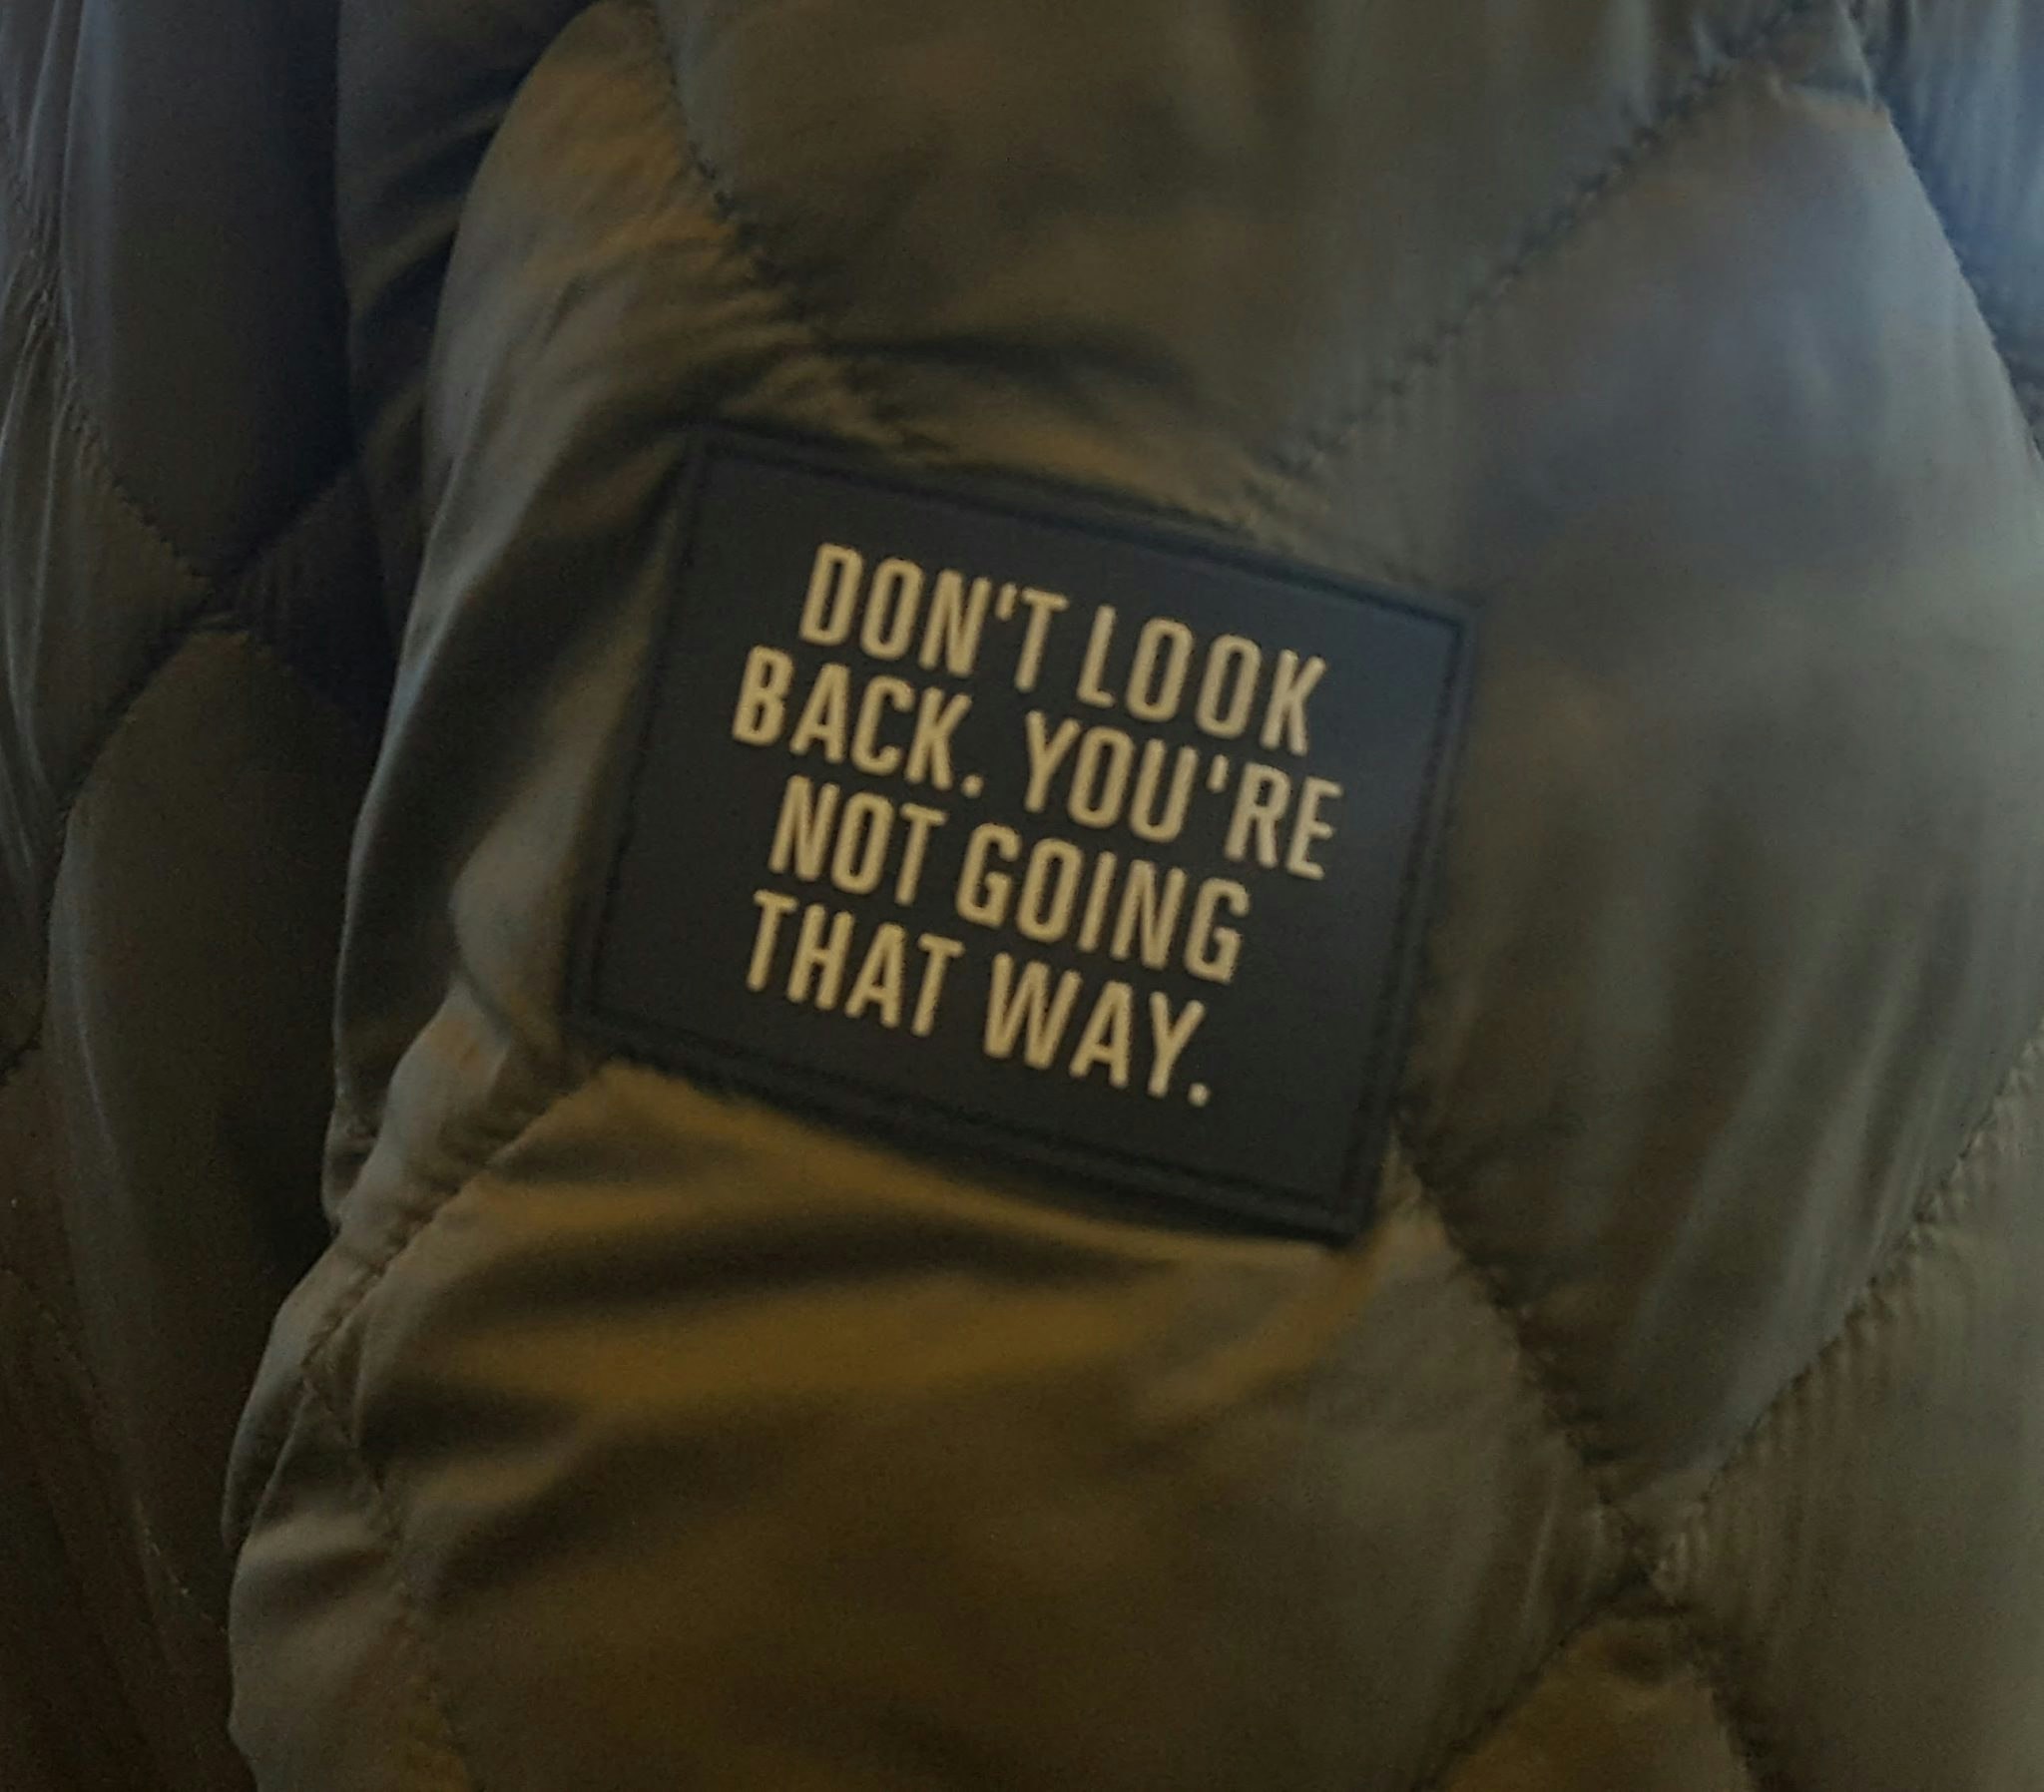 “I took the attached picture years ago at an airport (a man was wearing a jacket with a patch). It helps me keep moving forward in my own creative journey and in my career. It could help others who were laid off stay positive and focus on what's ahead.”